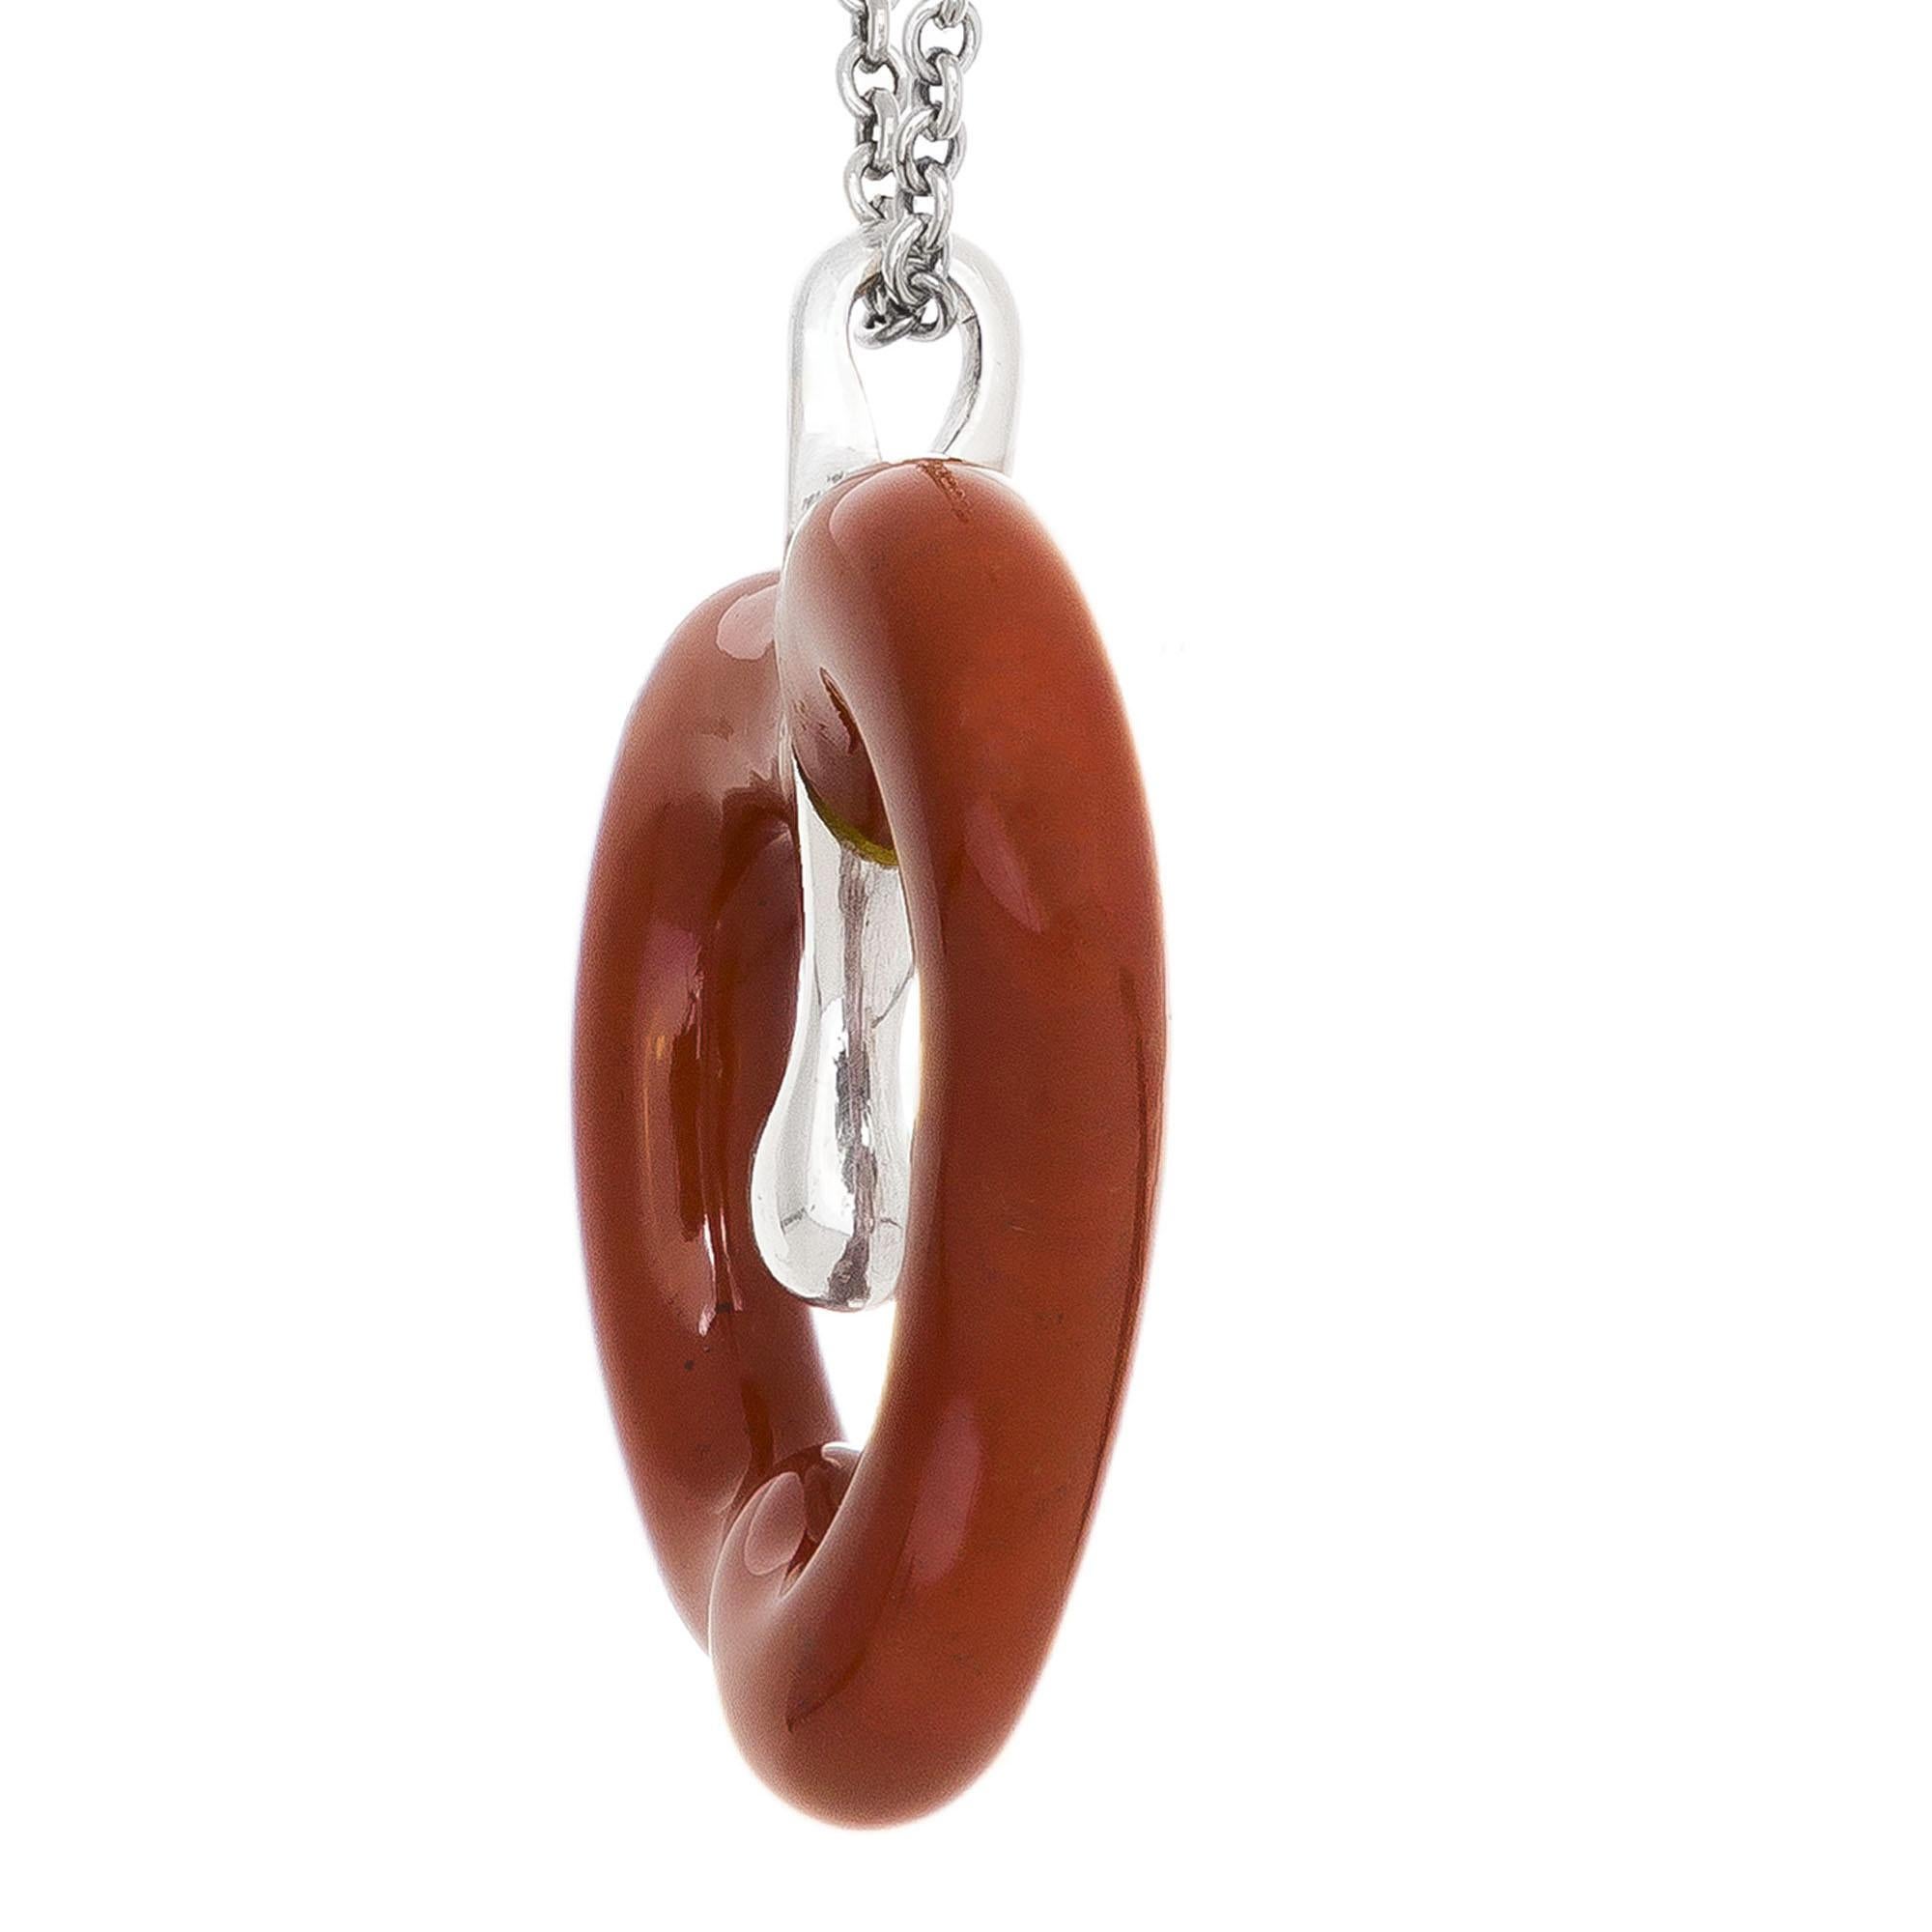 Elsa Peretti for Tiffany & Co. sterling silver jasper apple pendant necklace. Chain 28 inches long. 

1 jasper shaped brownish red apple
Sterling Silver
Stamped: Sterling 
Hallmark: Tiffany & Co 
9.0 grams
Top to bottom: 28.8mm or 1 1/8 Inch
Width: